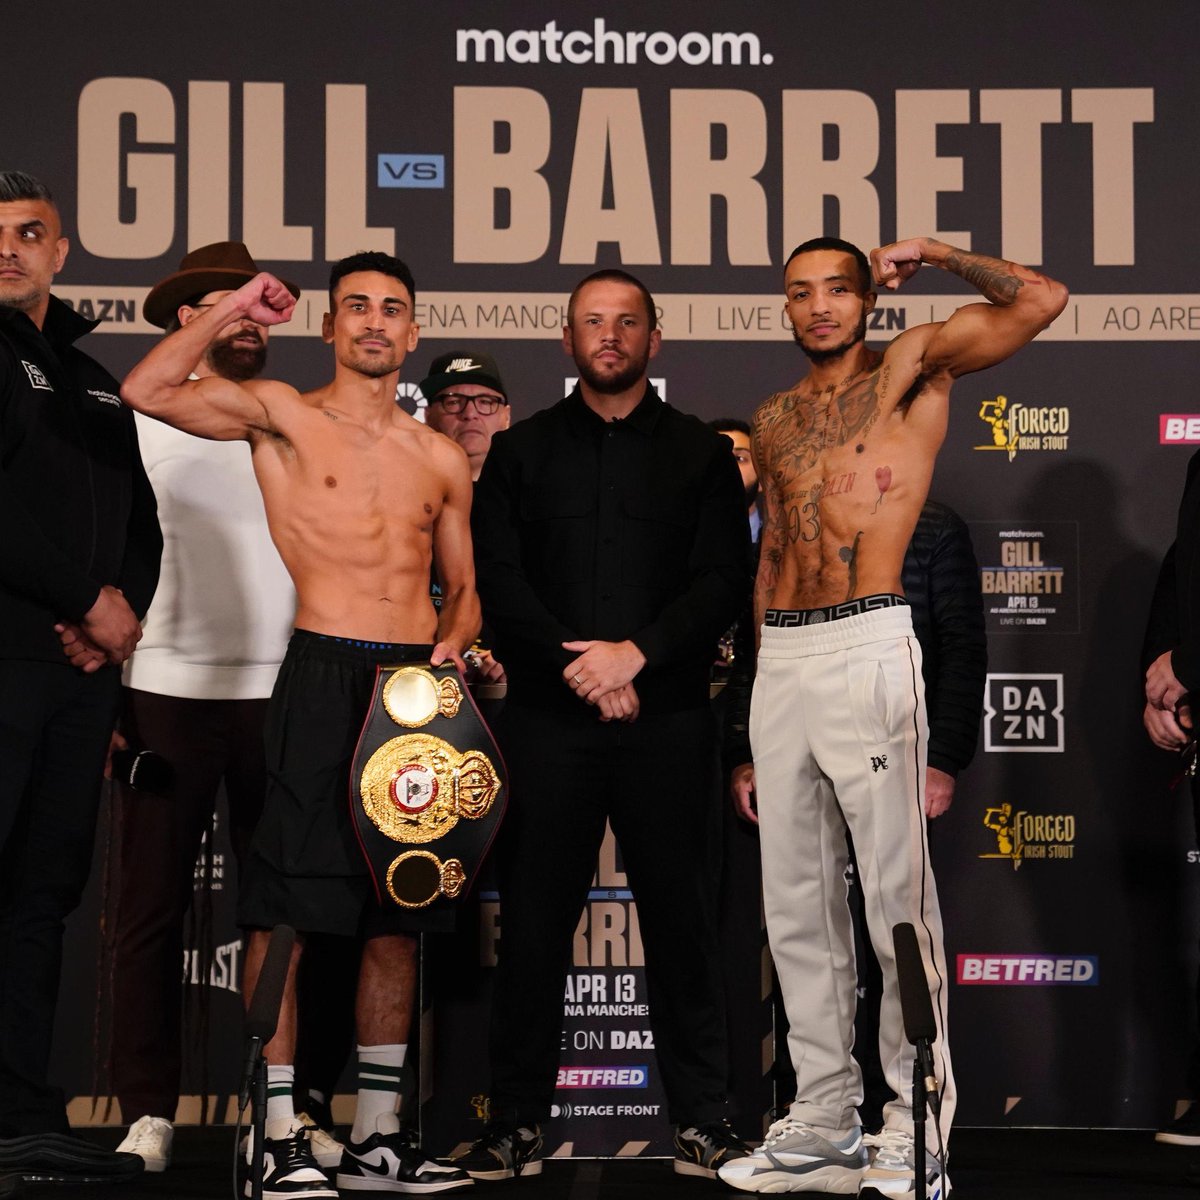 Weigh-in done in Manchester ⚖️ Gill: 129.5 lbs Barrett: 129.6 lbs WBA Super Featherweight International Championship 🏆 📸 @MatchroomBoxing